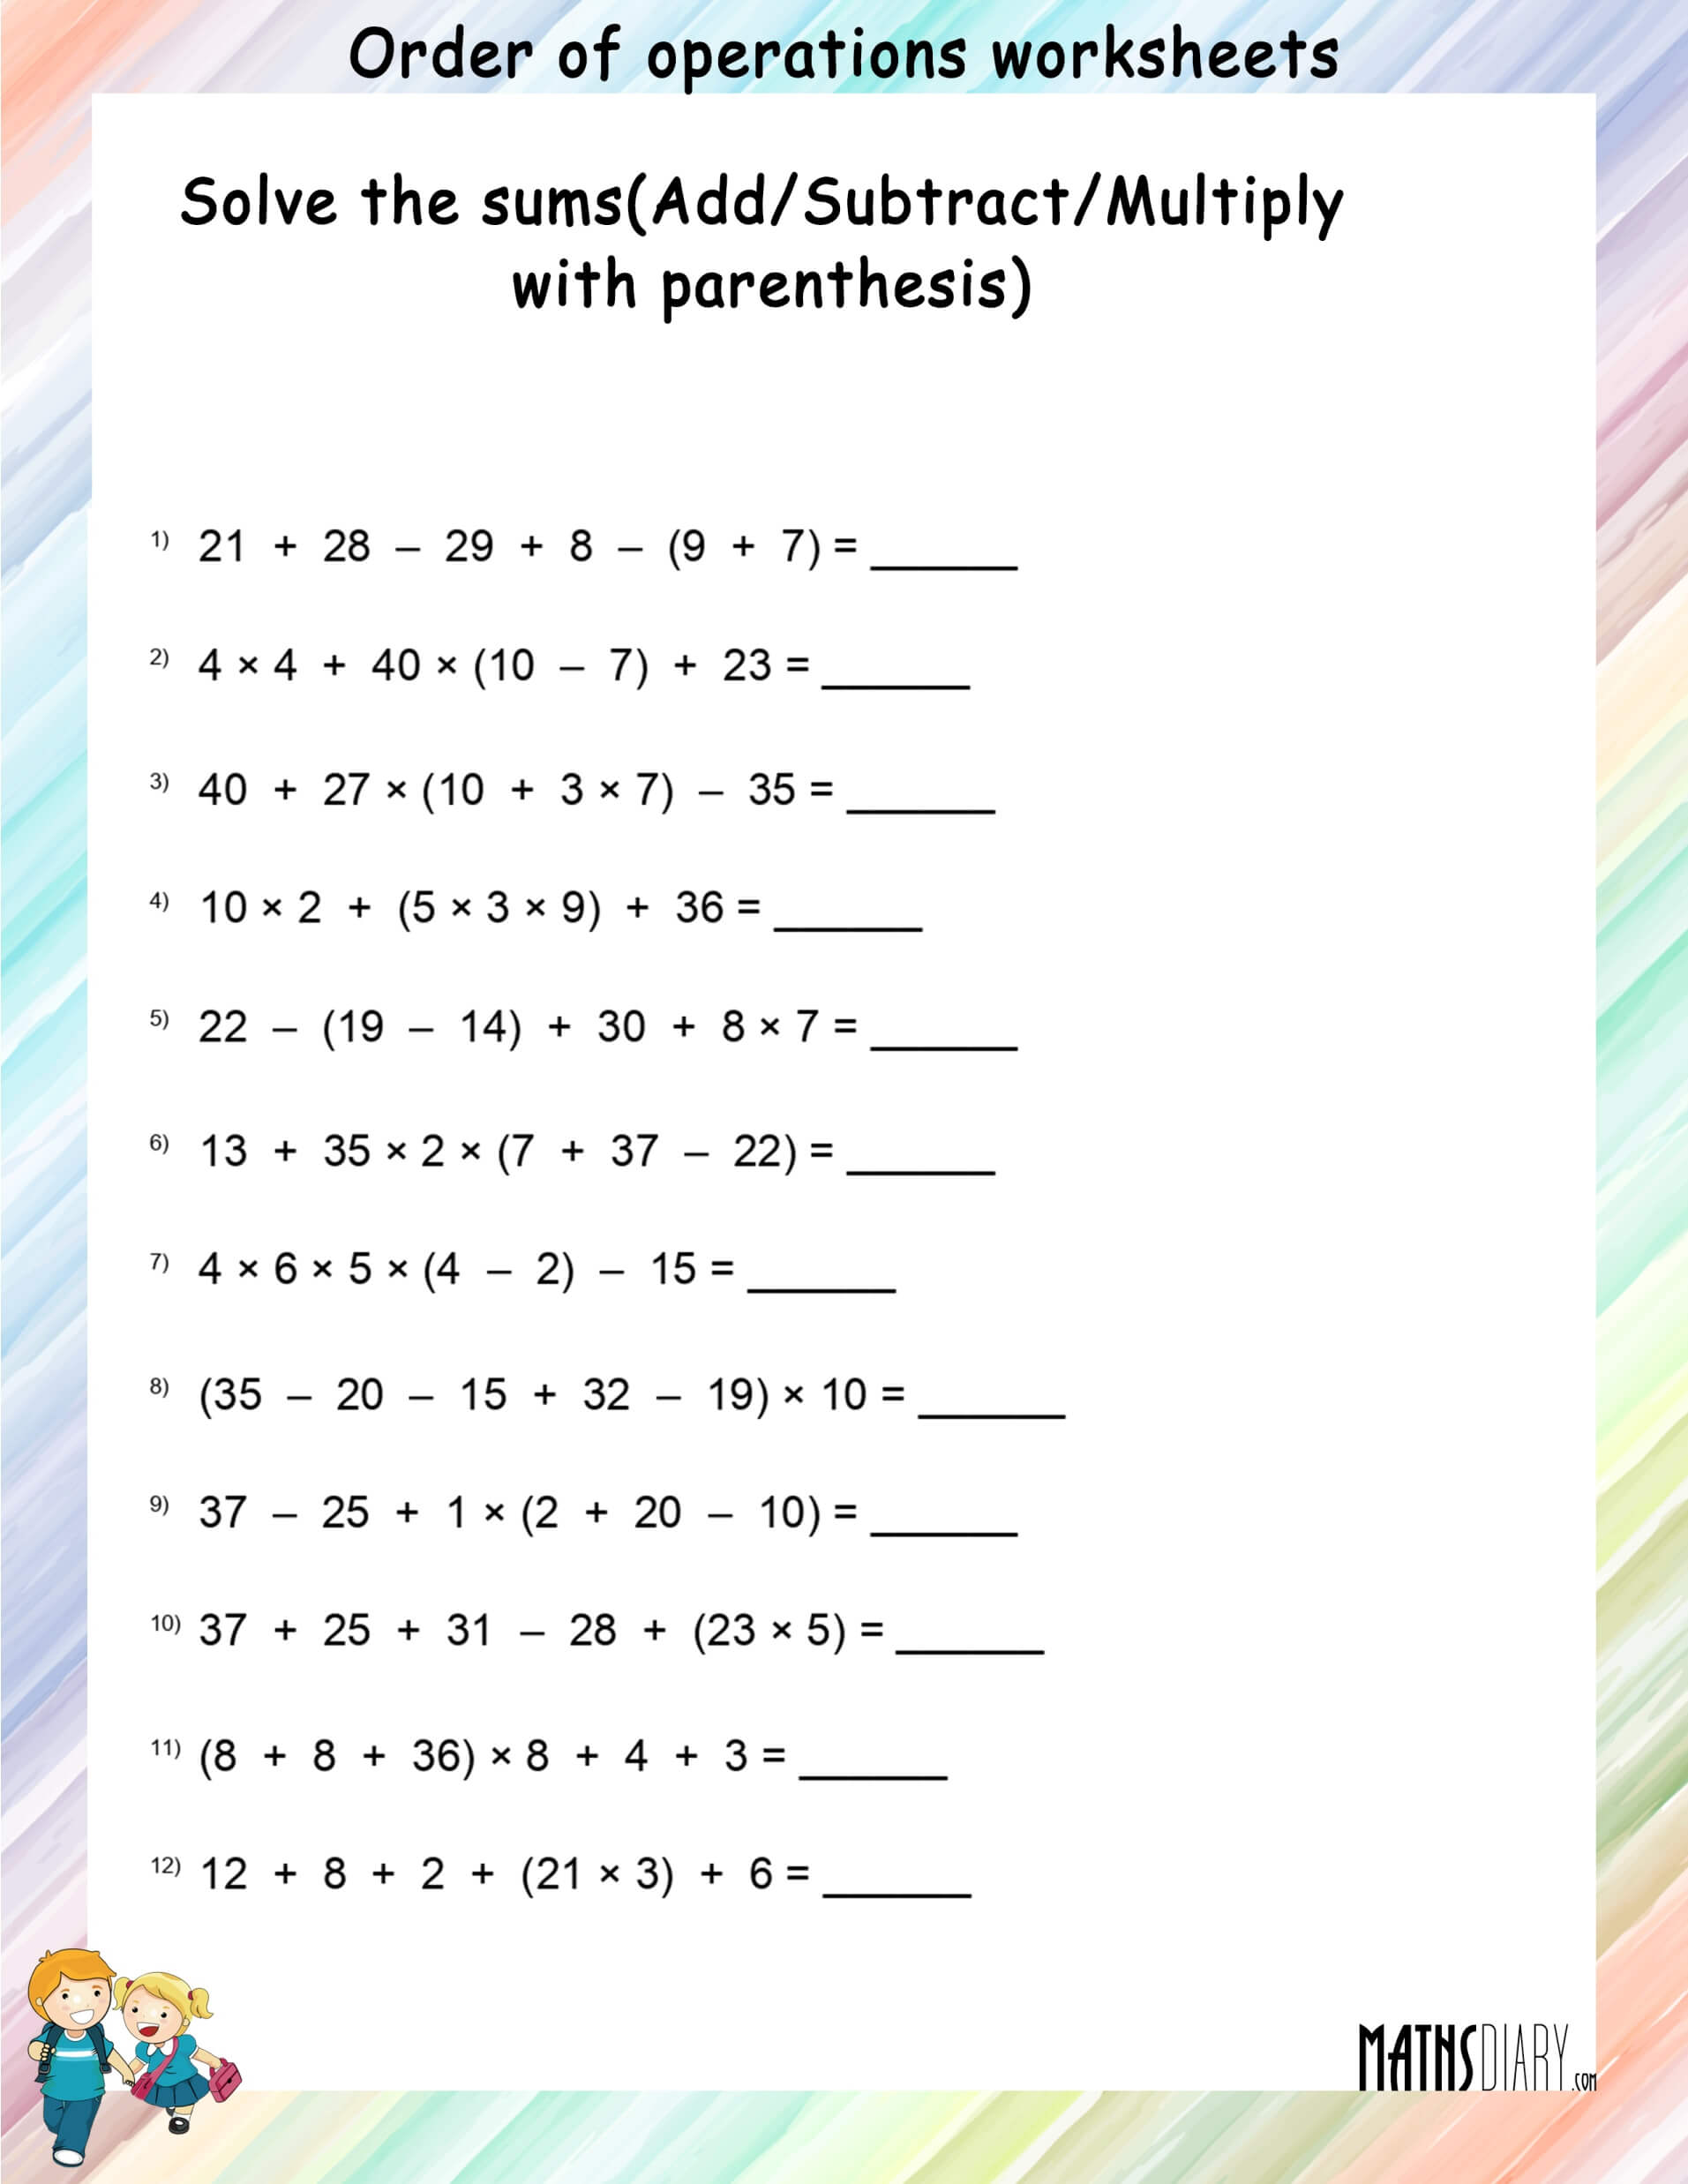 grade-3-order-of-operations-worksheets-free-and-printable-k5-learning